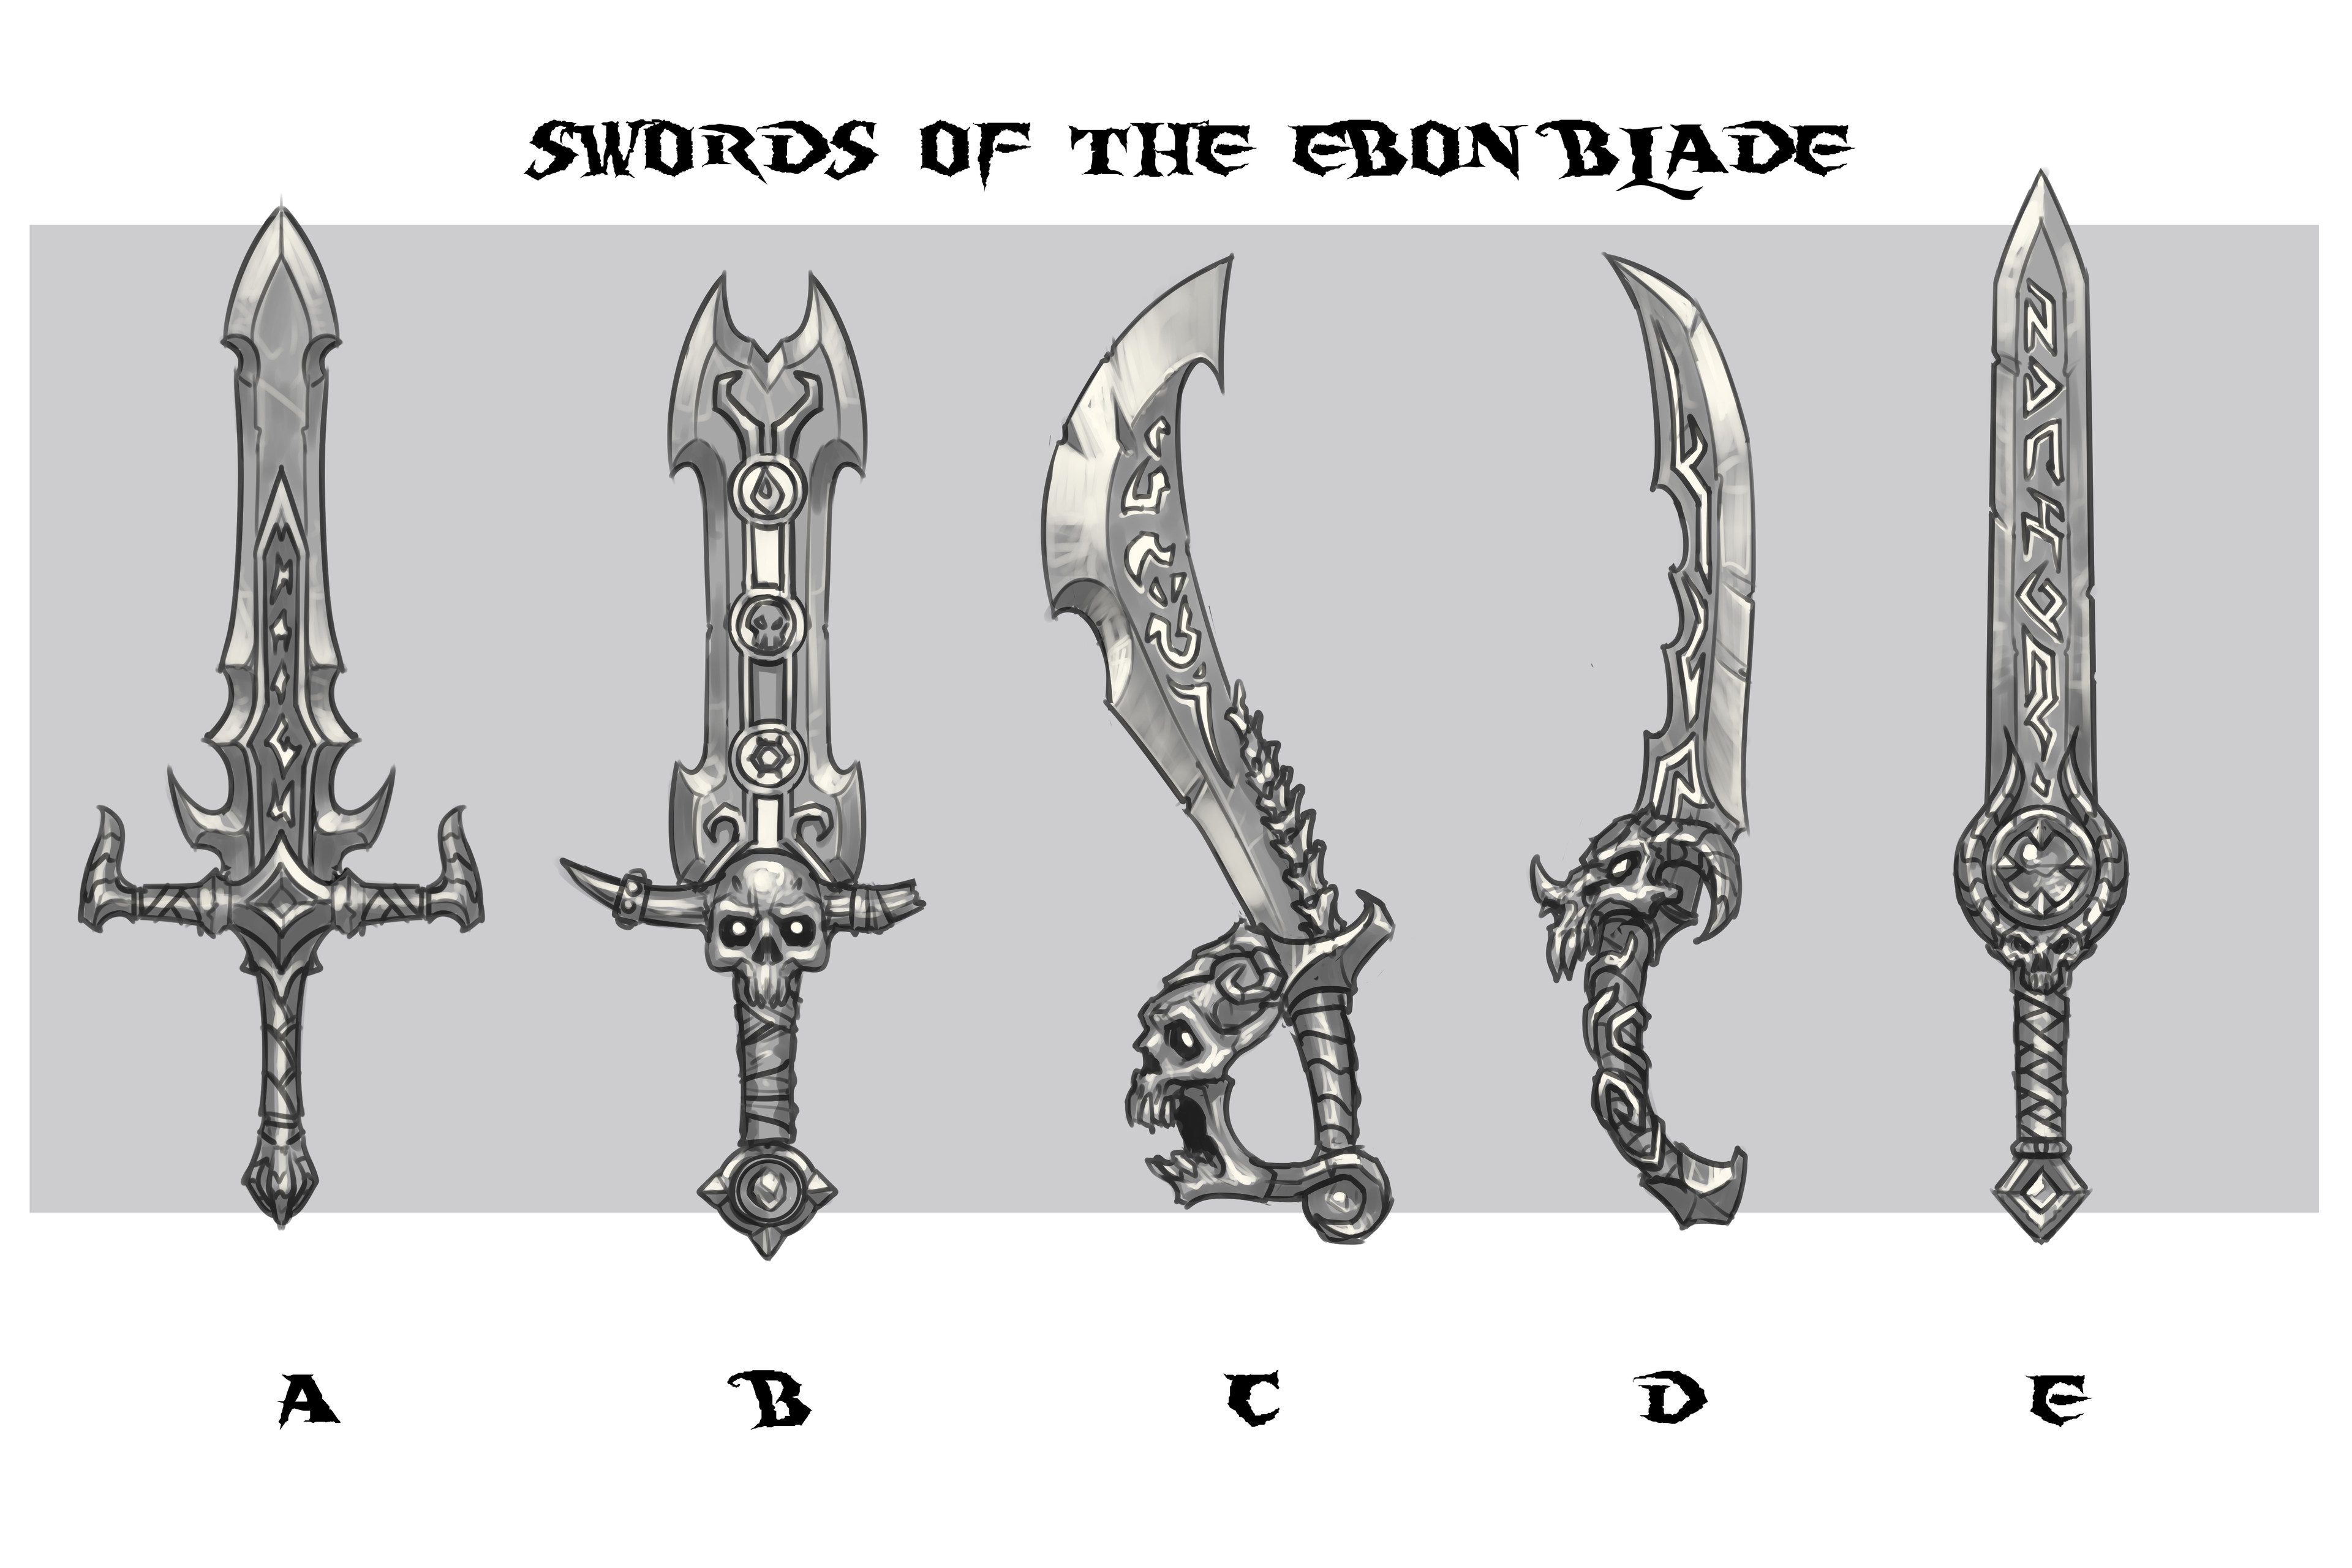 One-handed sword concepts